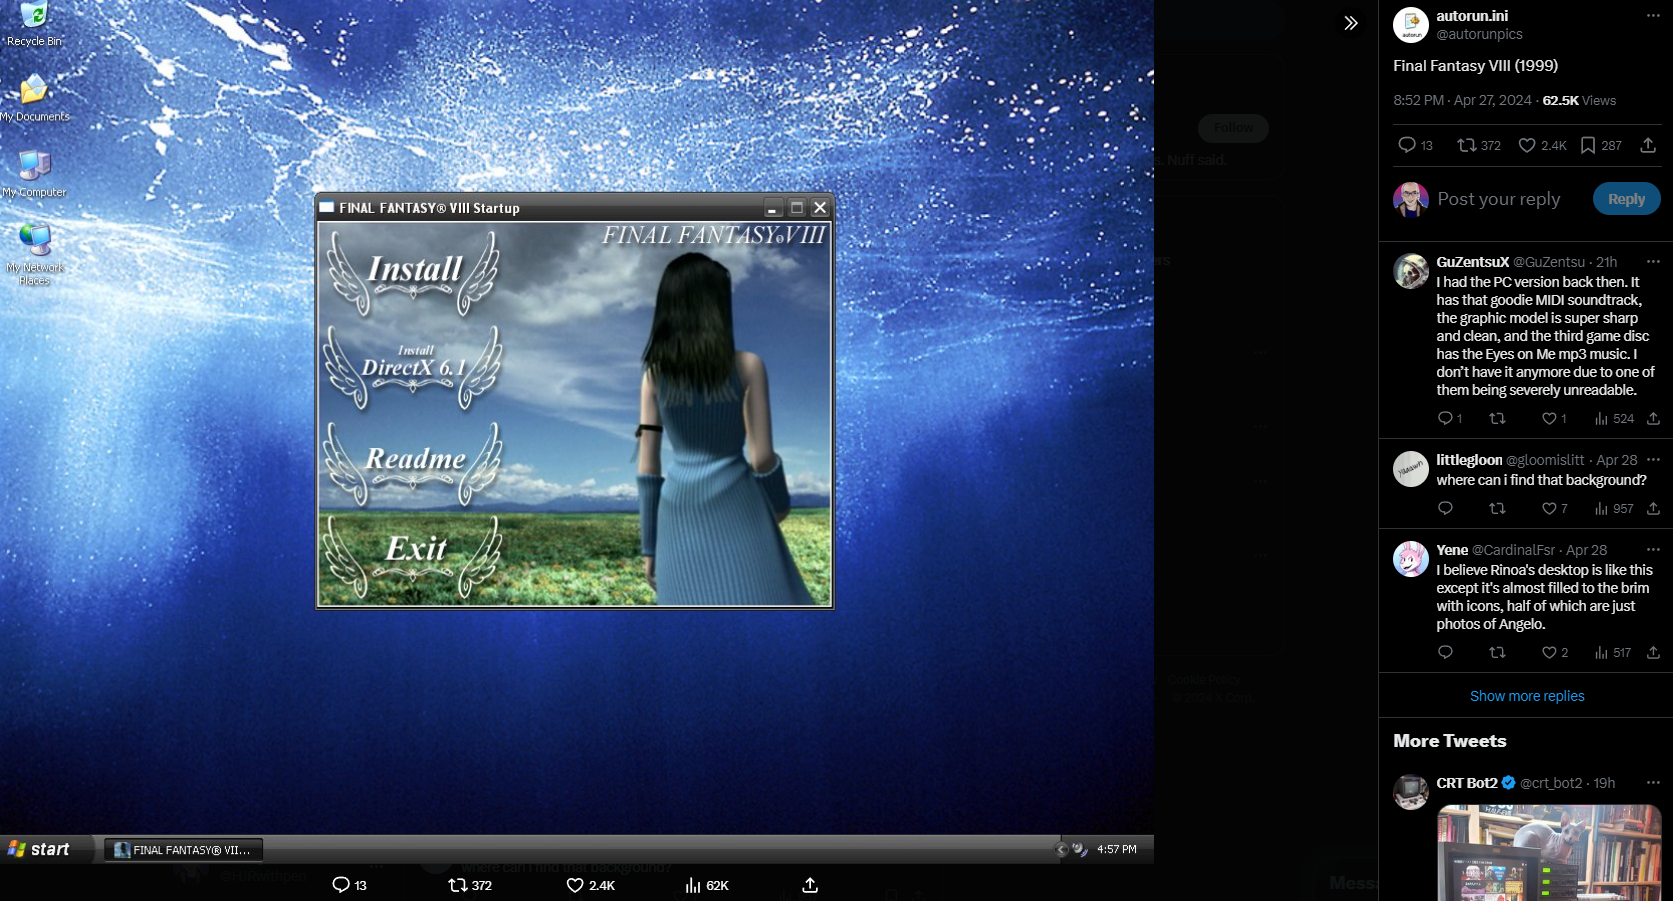 An image of FF8's installer, as shared by @autorun.ini on Twitter/X.